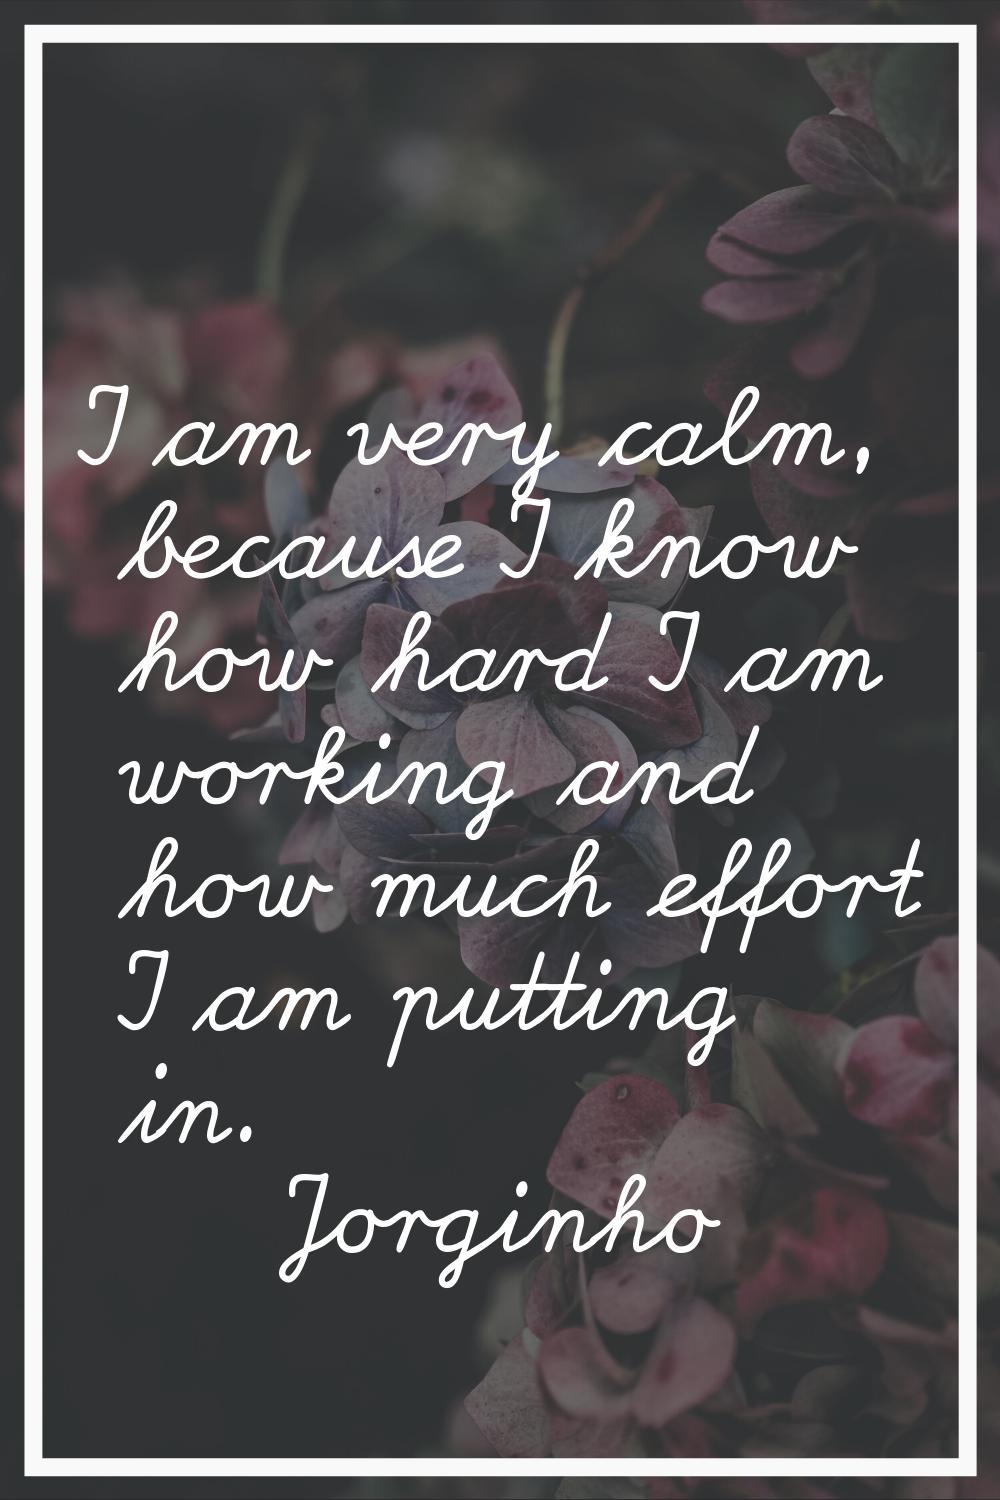 I am very calm, because I know how hard I am working and how much effort I am putting in.